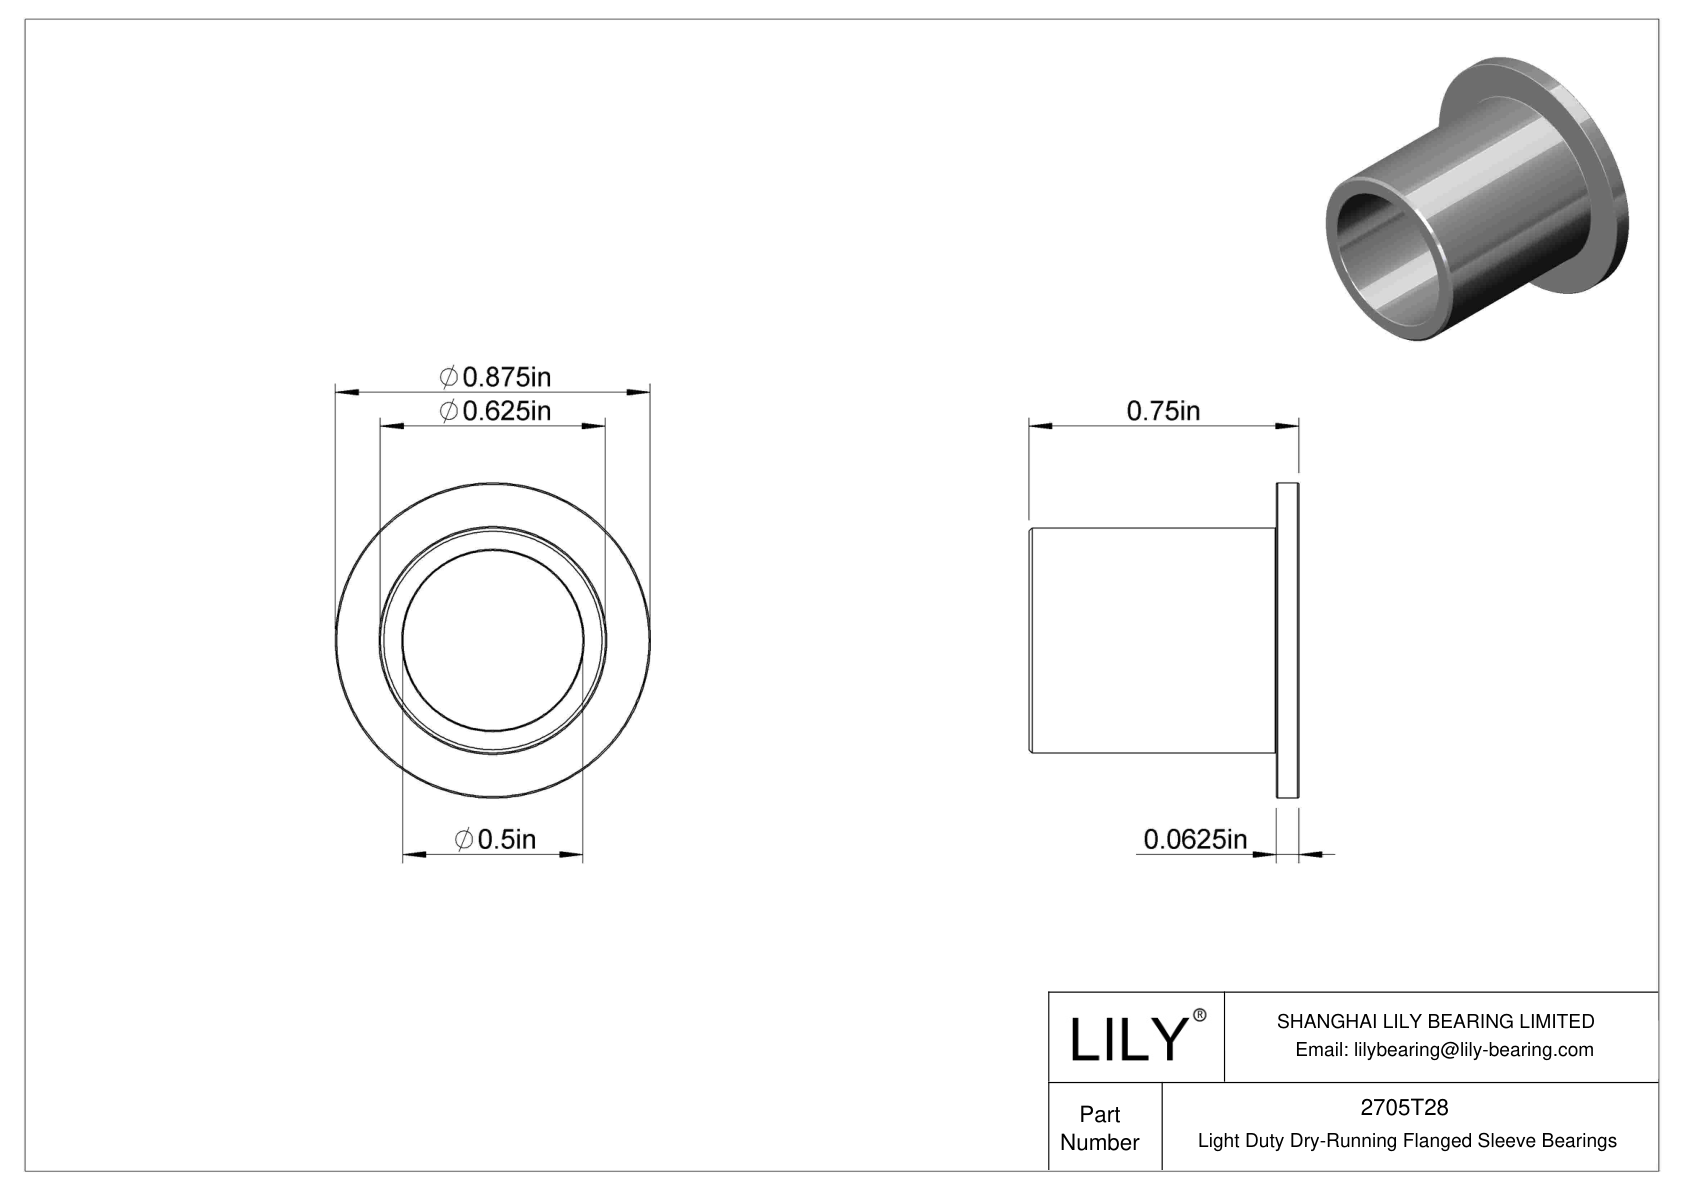 CHAFTCI Light Duty Dry-Running Flanged Sleeve Bearings cad drawing